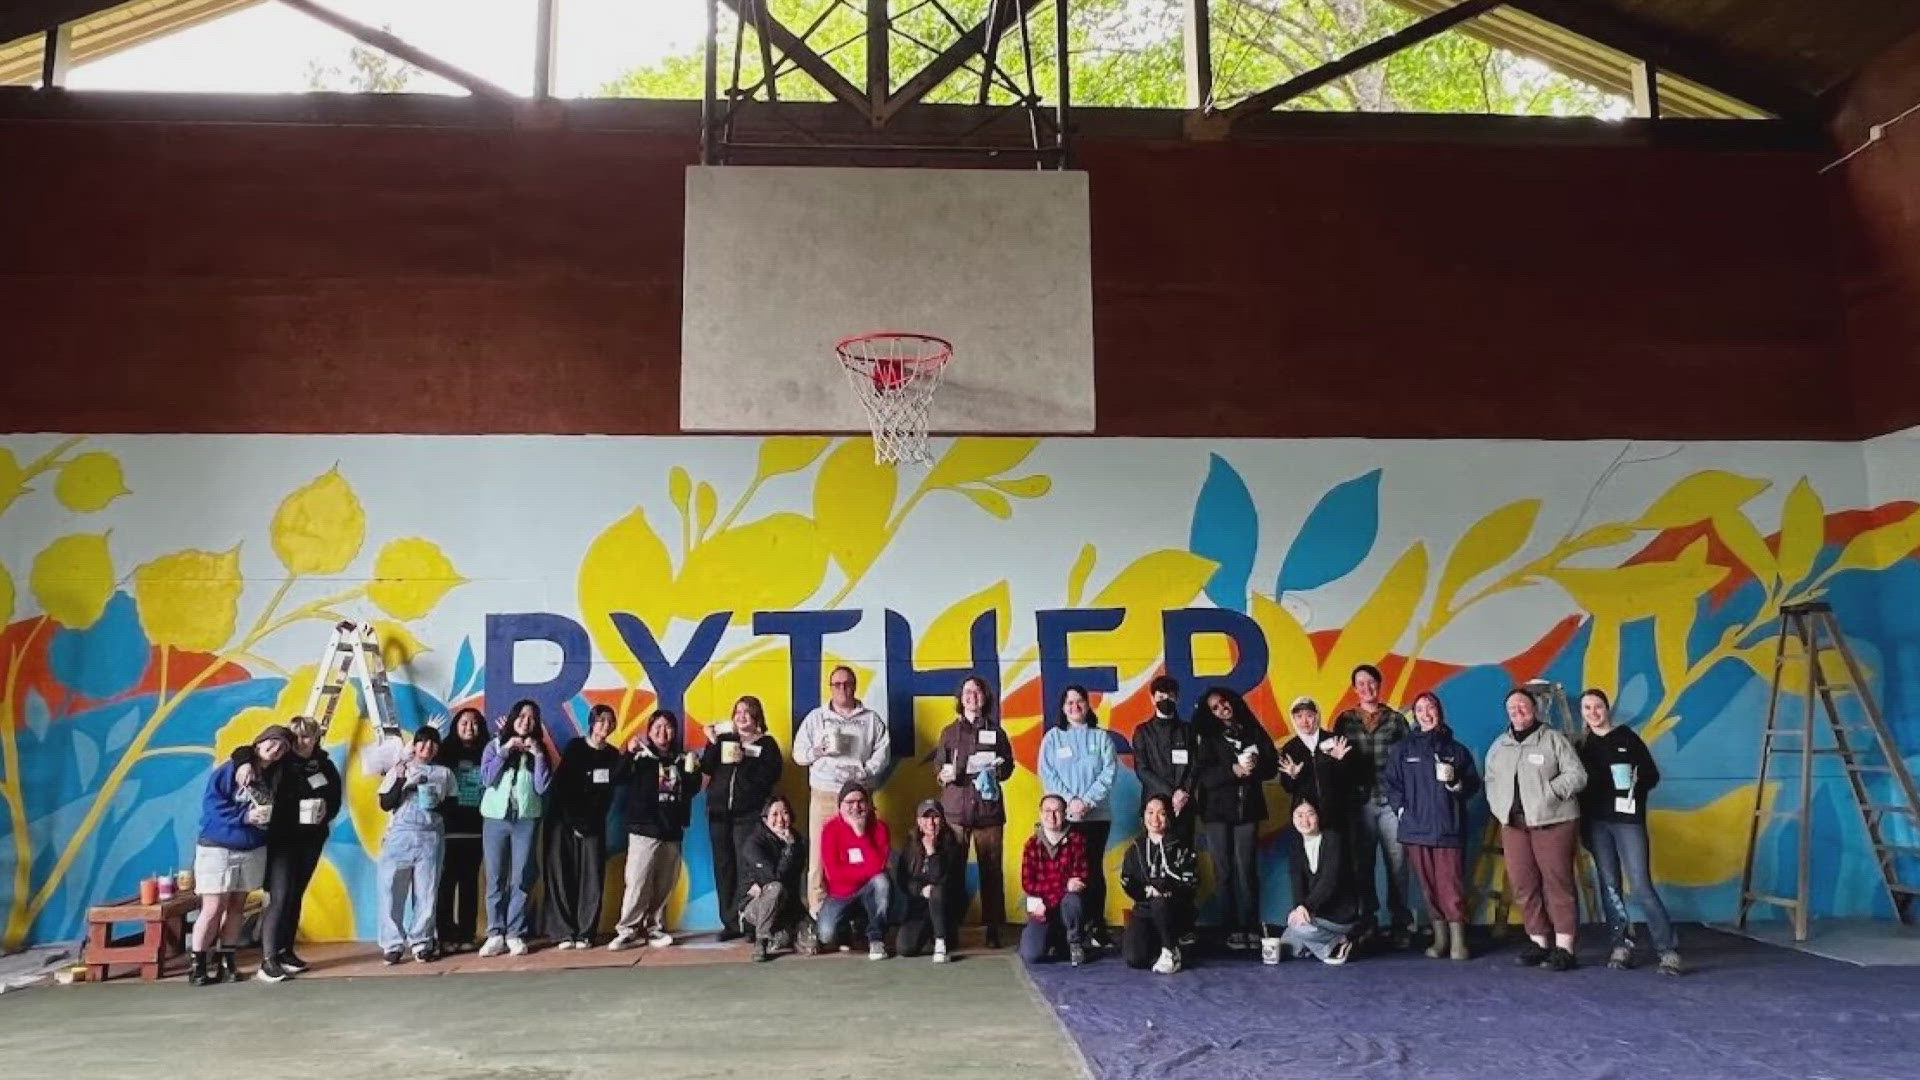 One-day community mural completed by Seattle behavioral services nonprofit